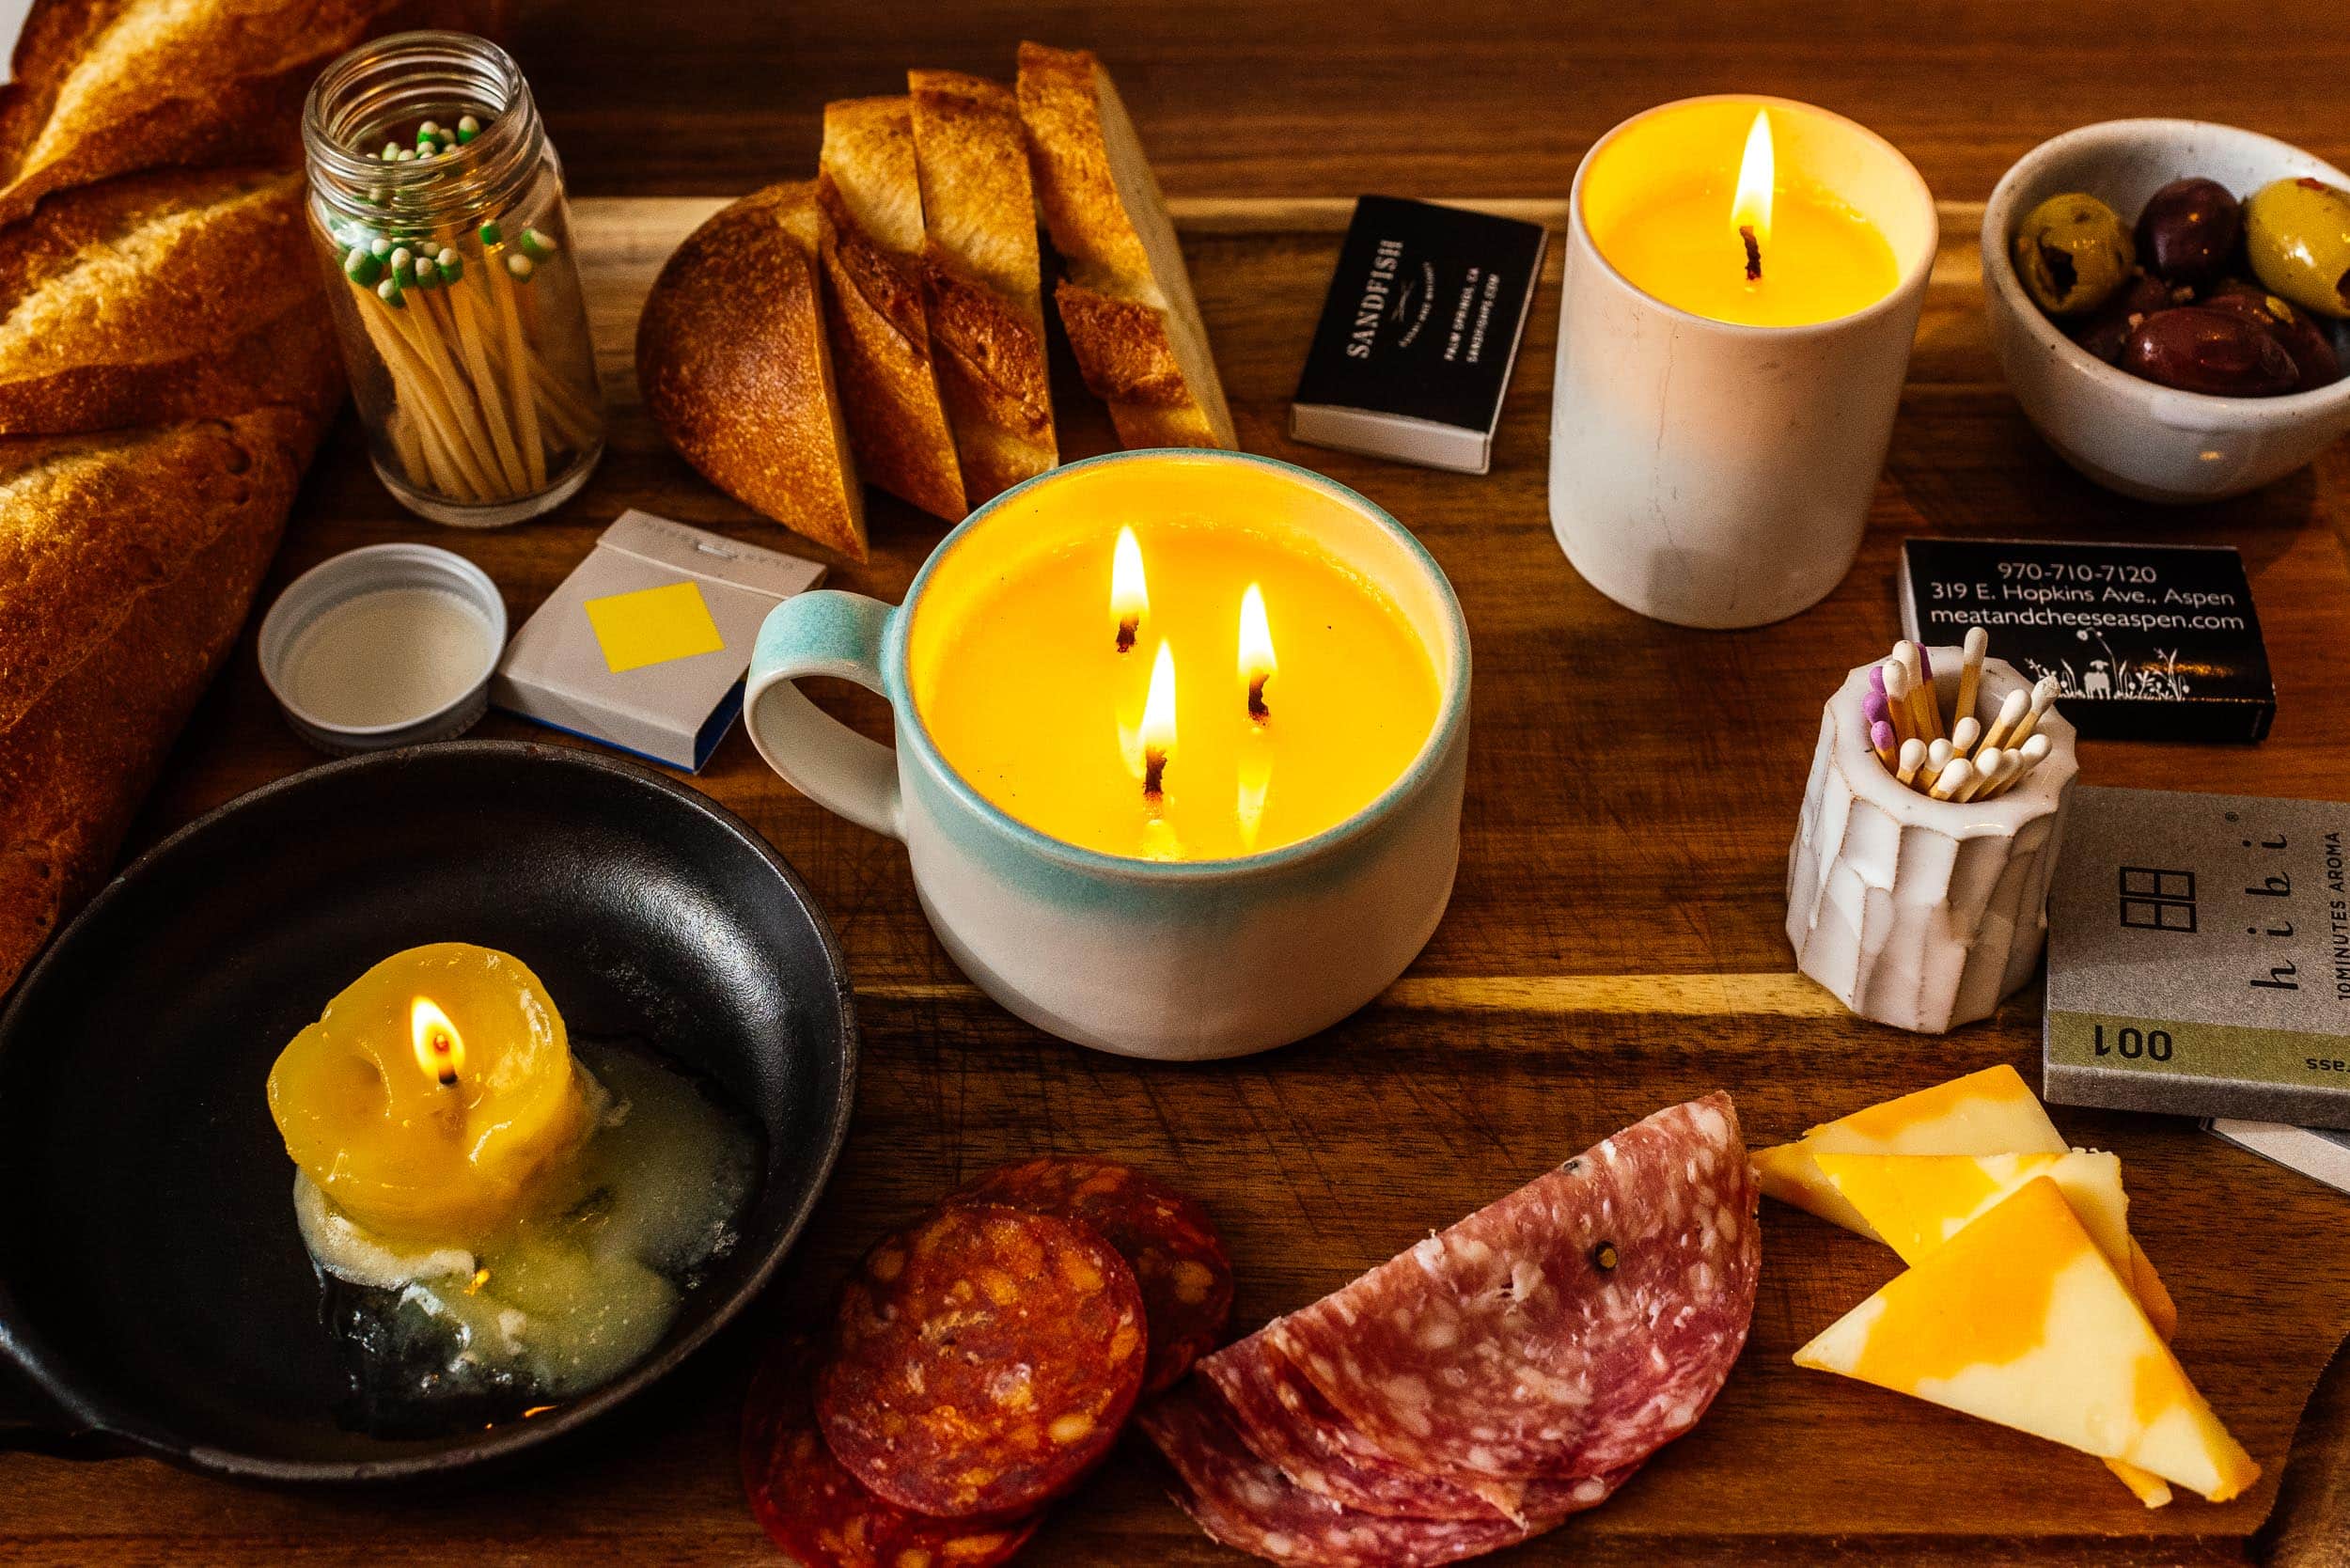 Is the Butter Candle Worth Trying?